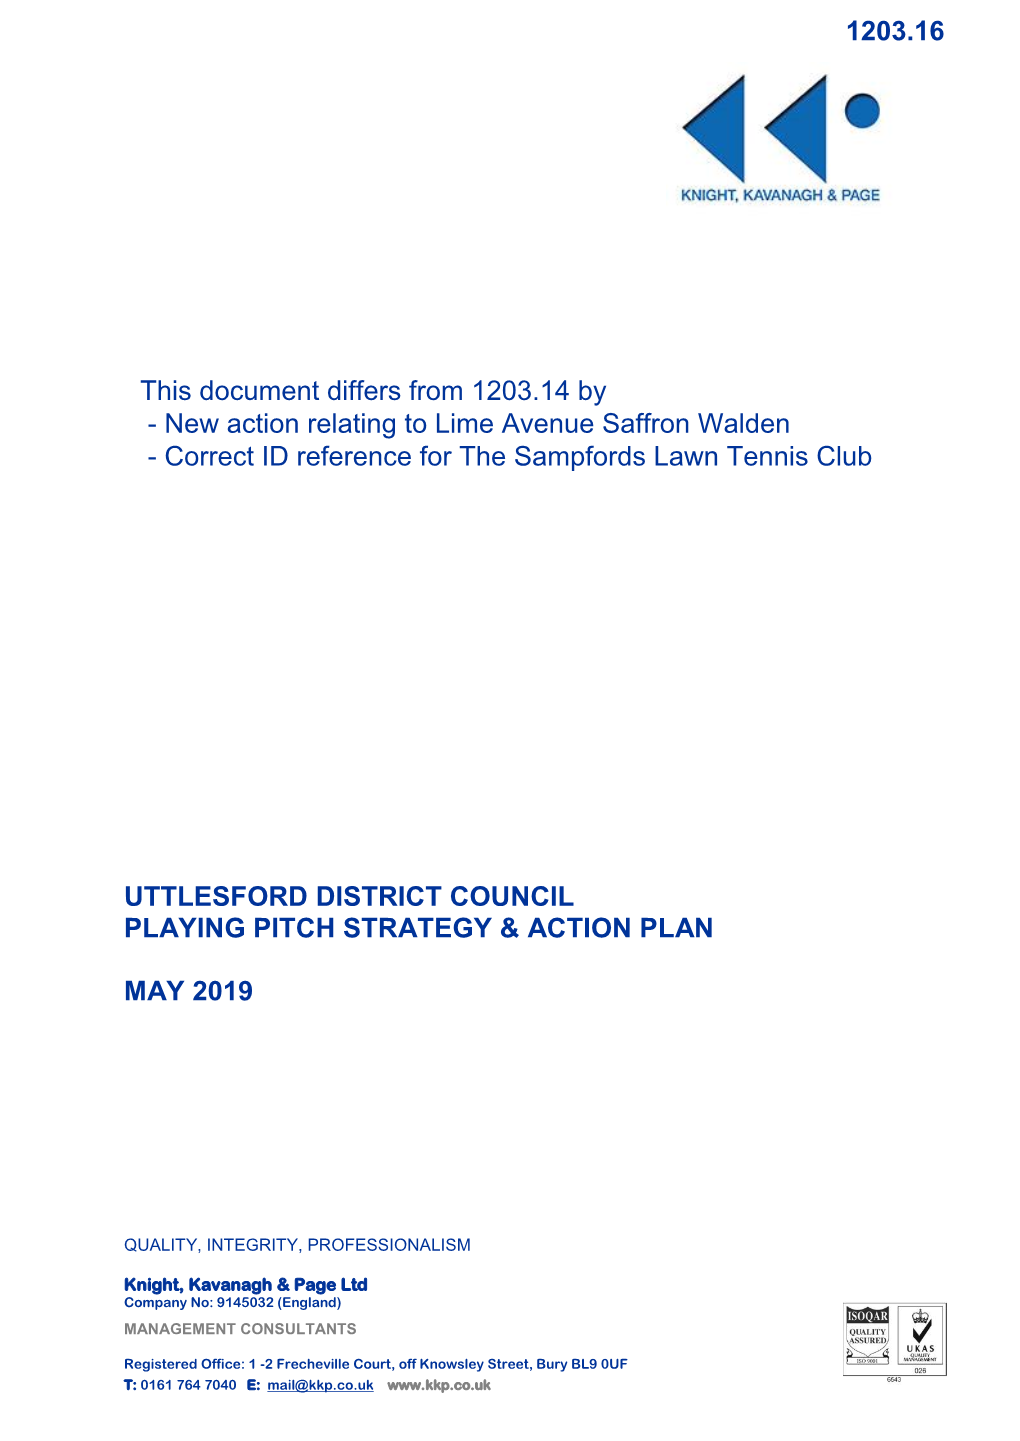 Uttlesford District Council Playing Pitch Strategy & Action Plan